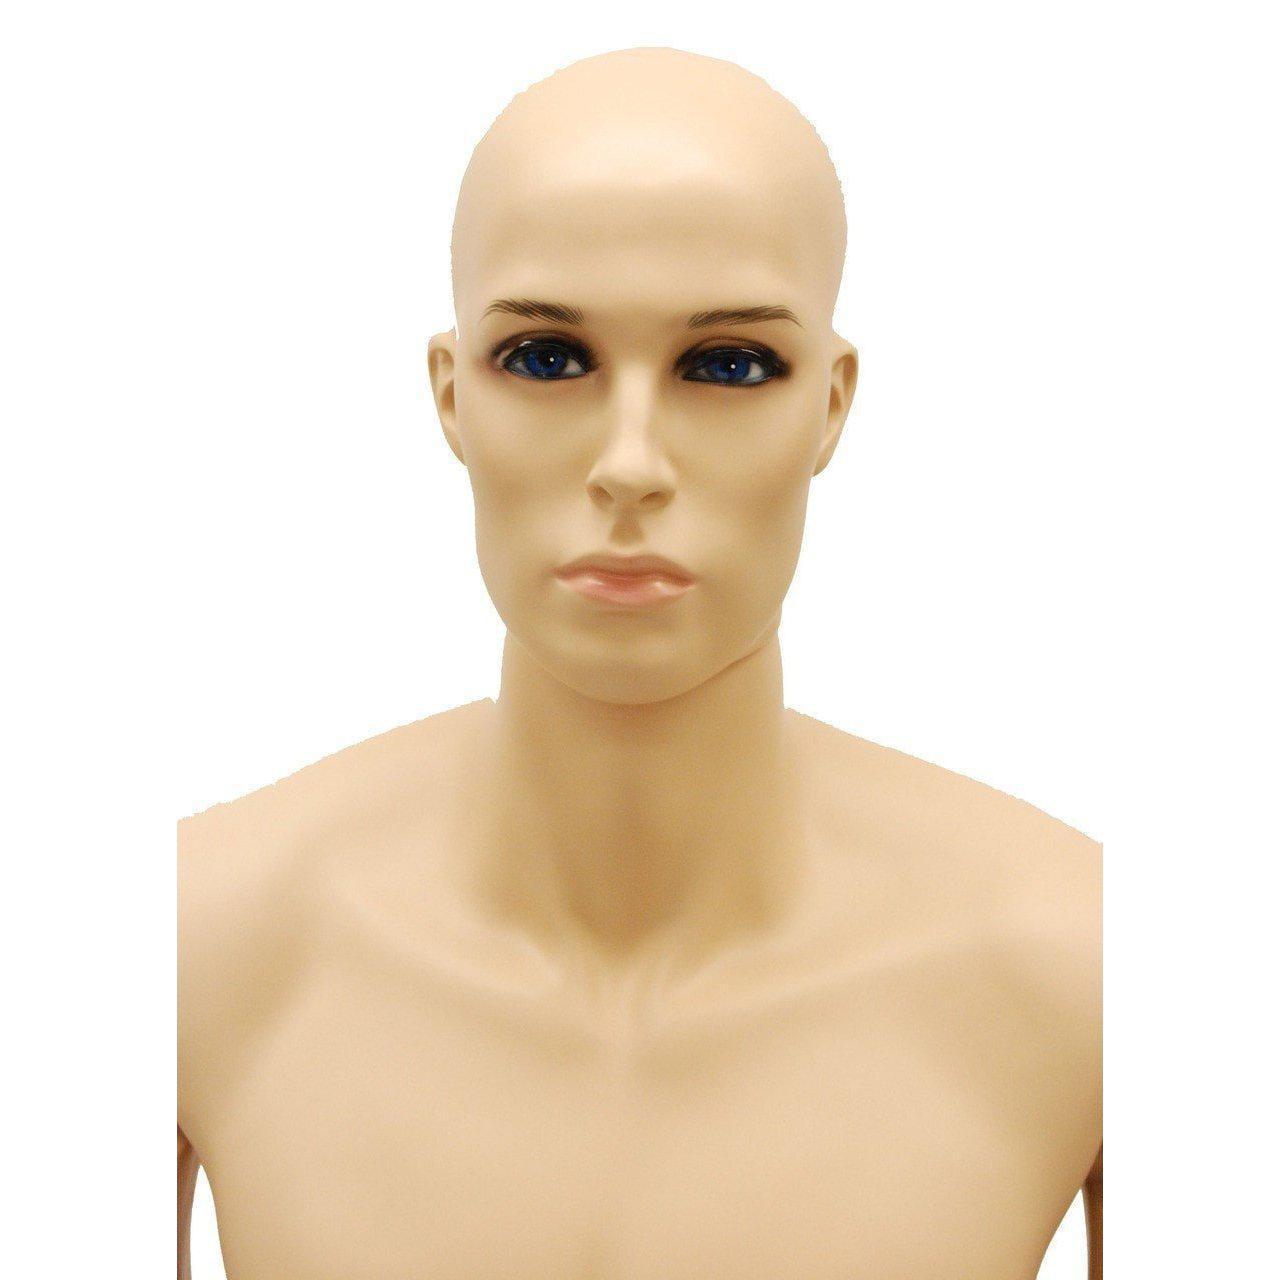 Bendable Male Mannequin w/ Realistic Head